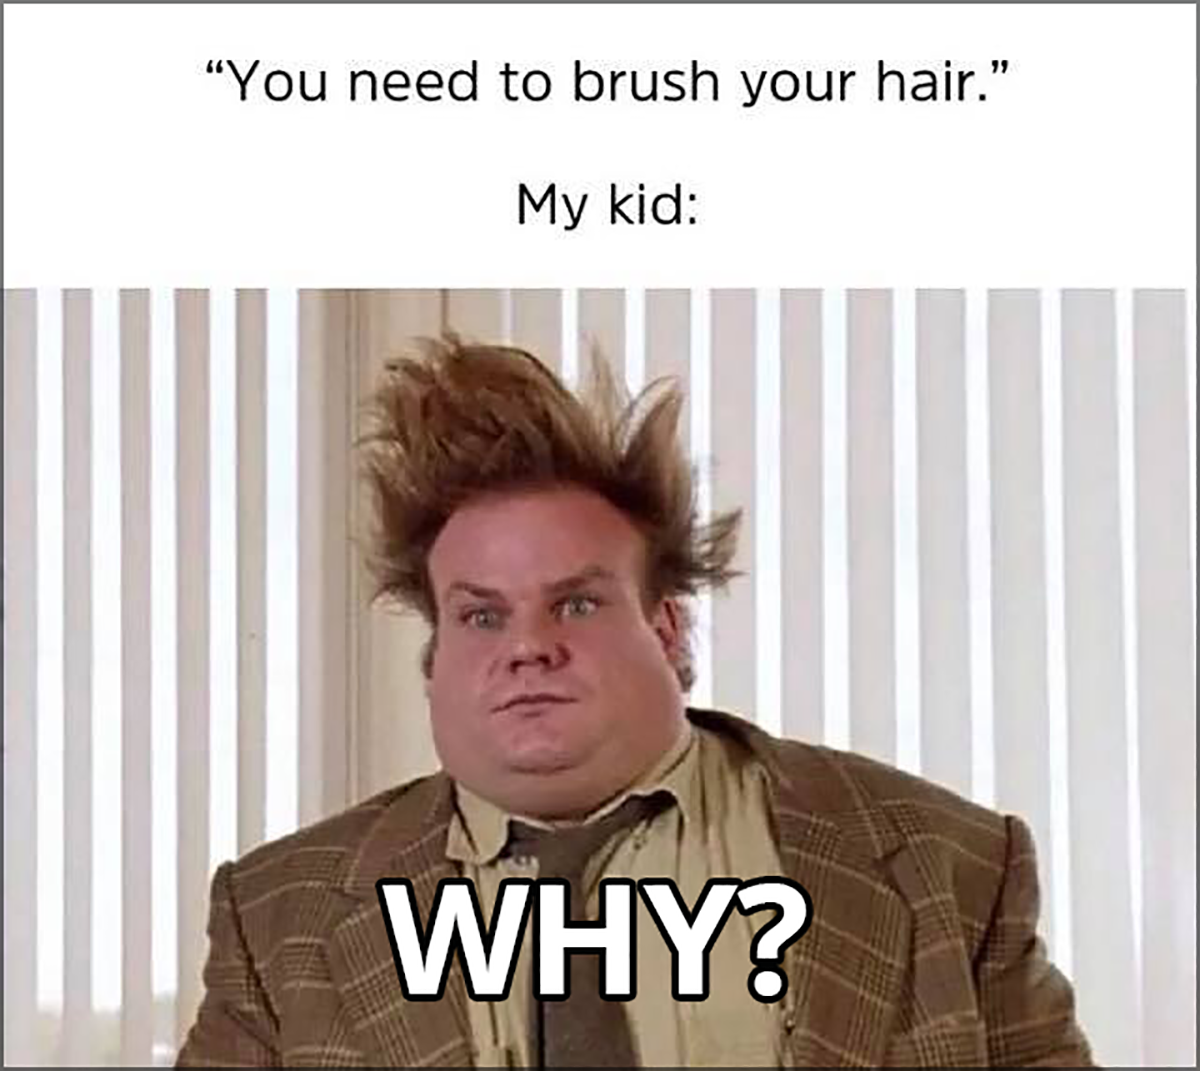 monday memes - memes that will make your mom laugh - "You need to brush your hair." My kid Why?